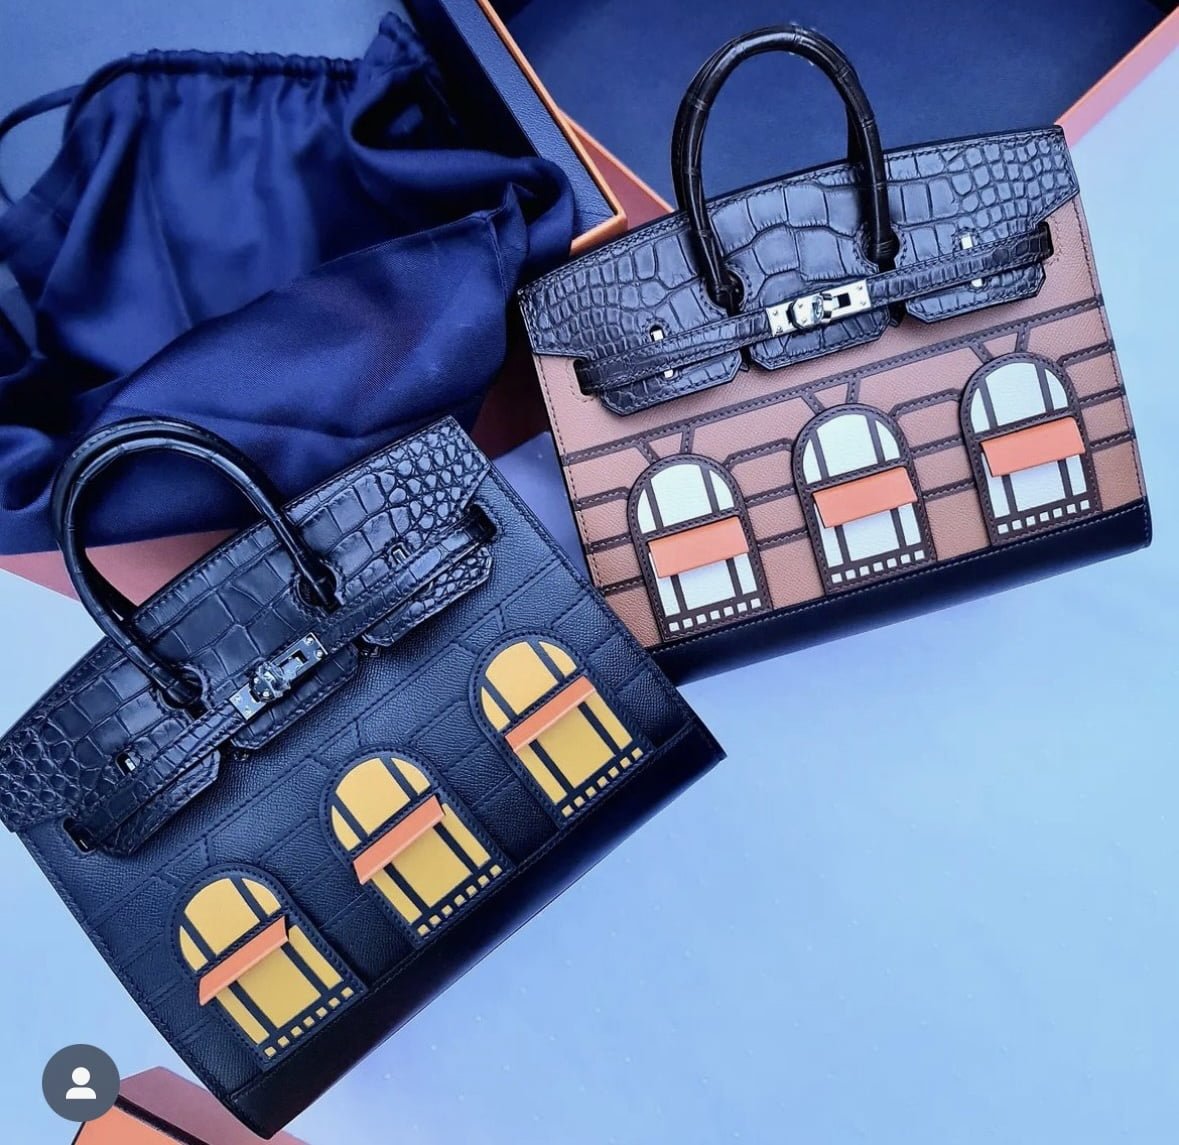 Why Are So Many People Investing in Handbags Right Now?